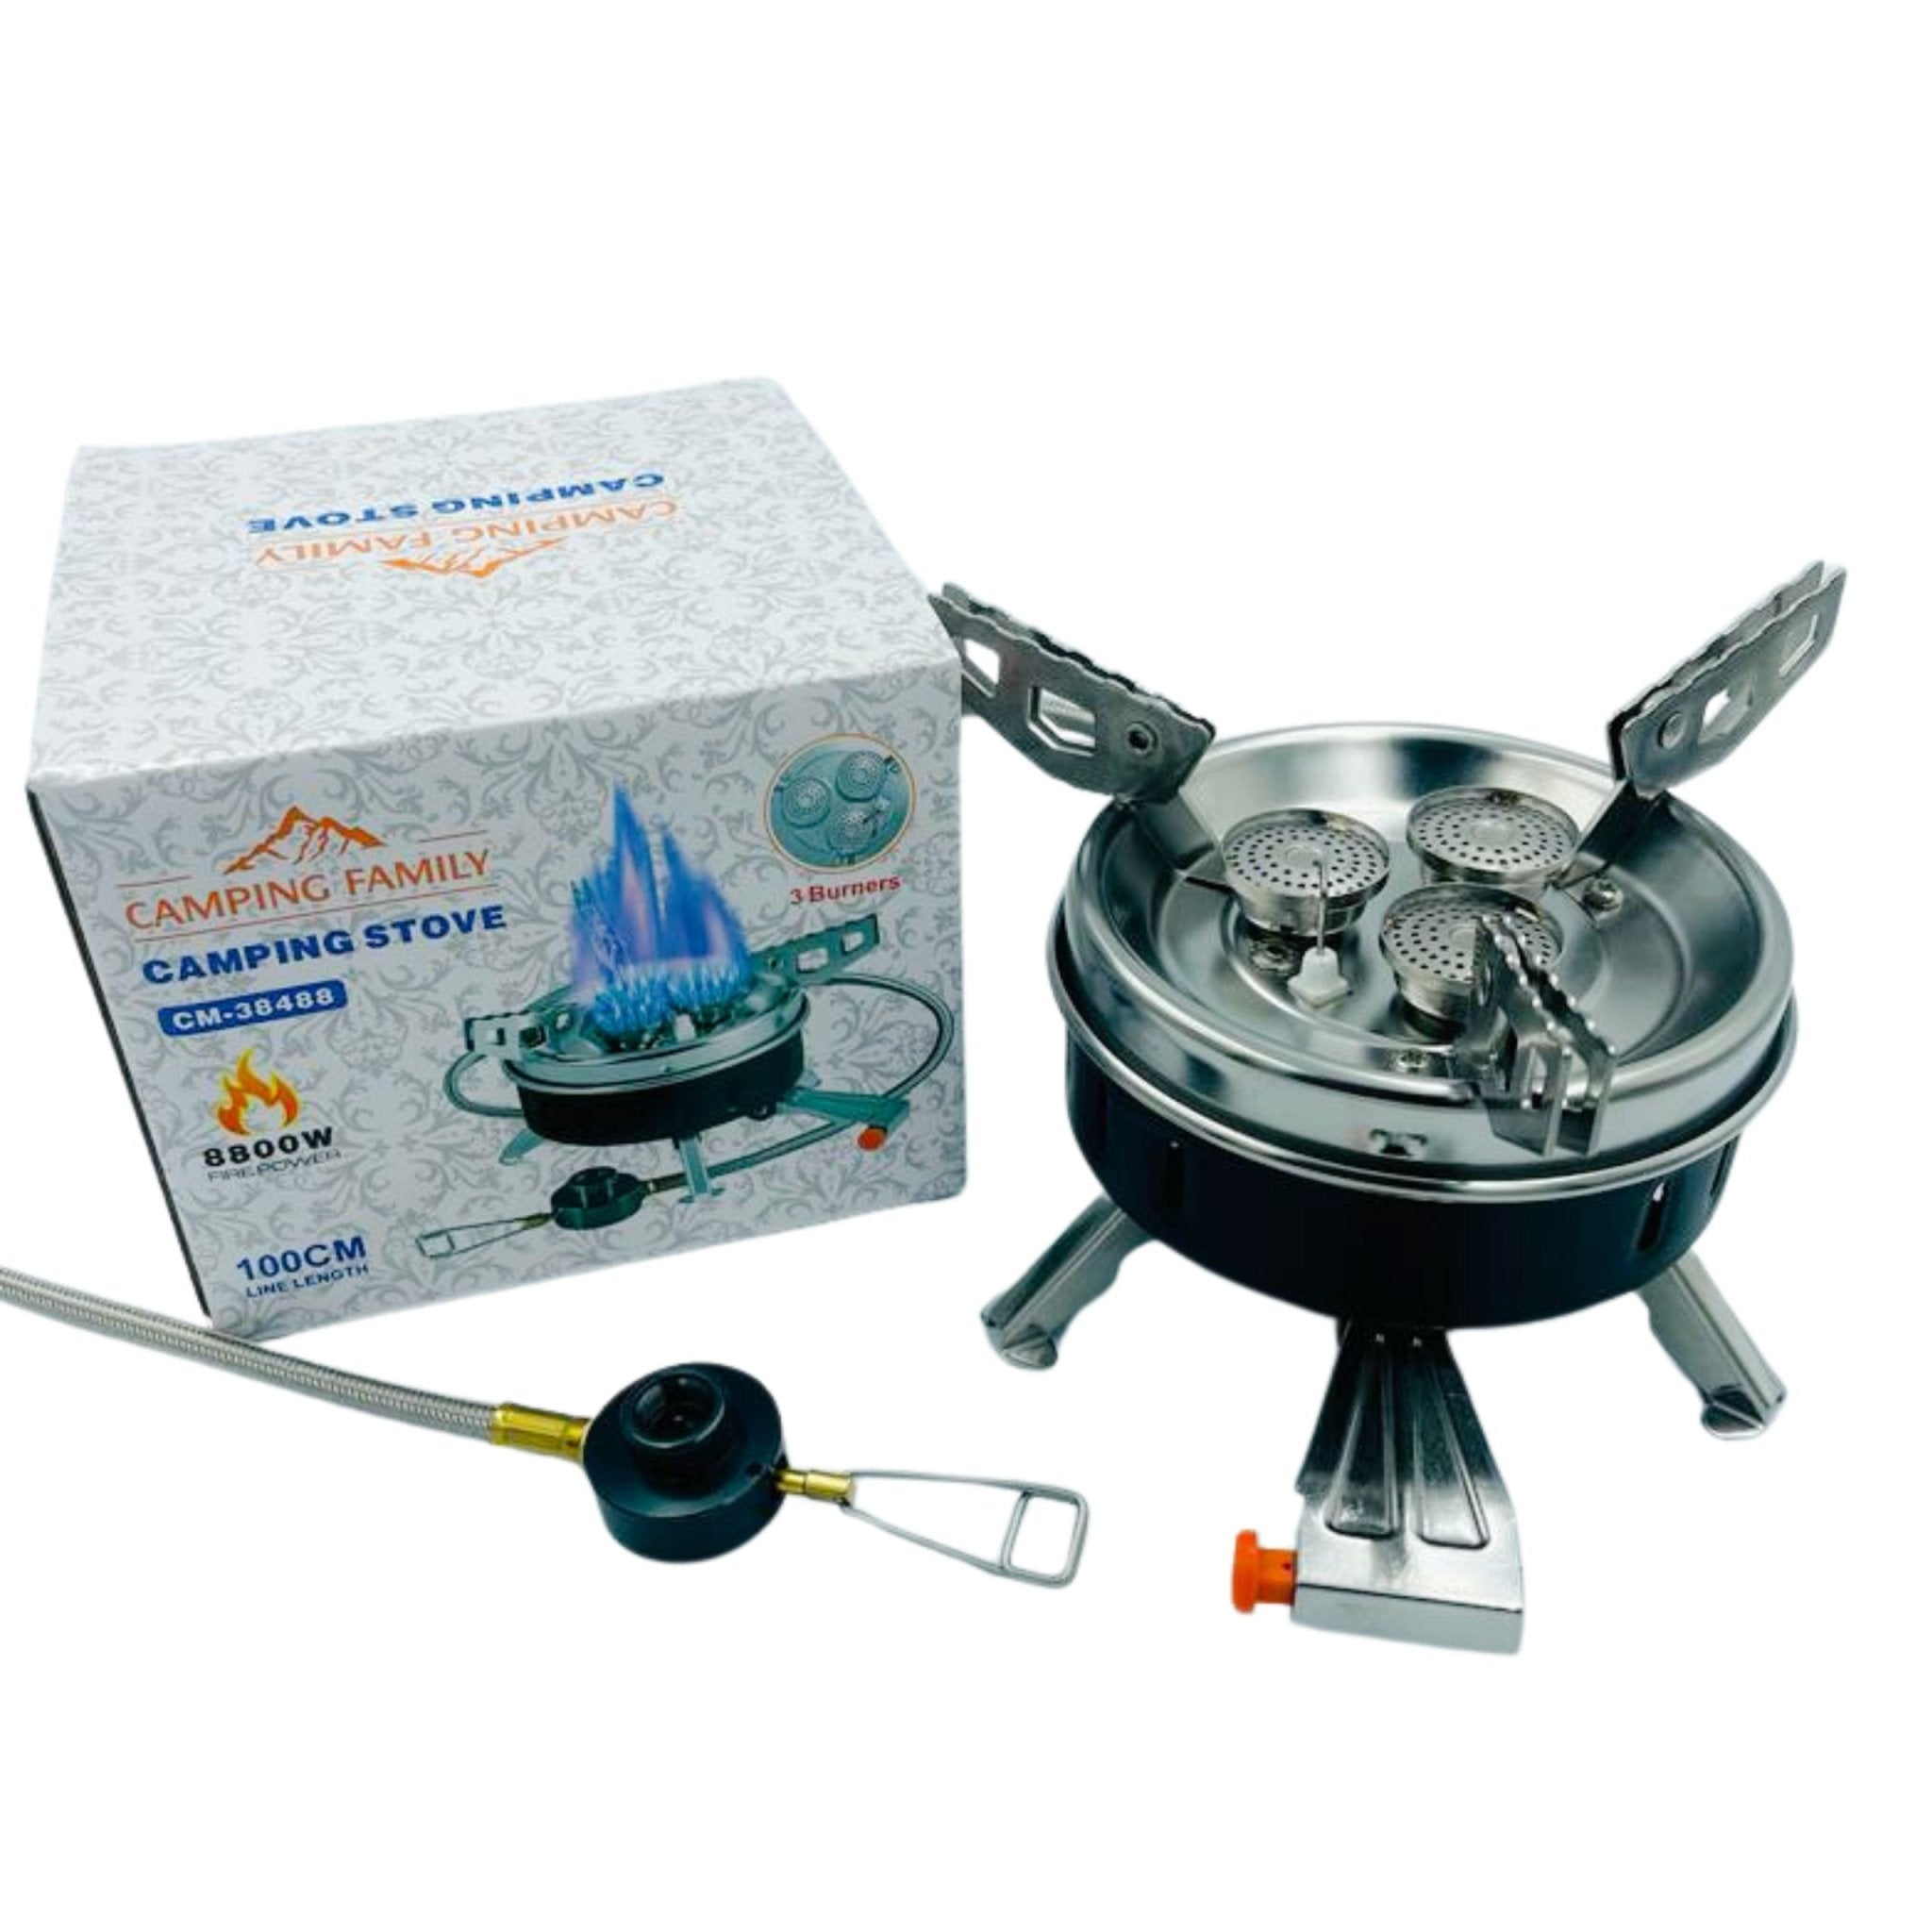 Camping Family Camping Stove 3 Burners 88000W CM-38488 - Black